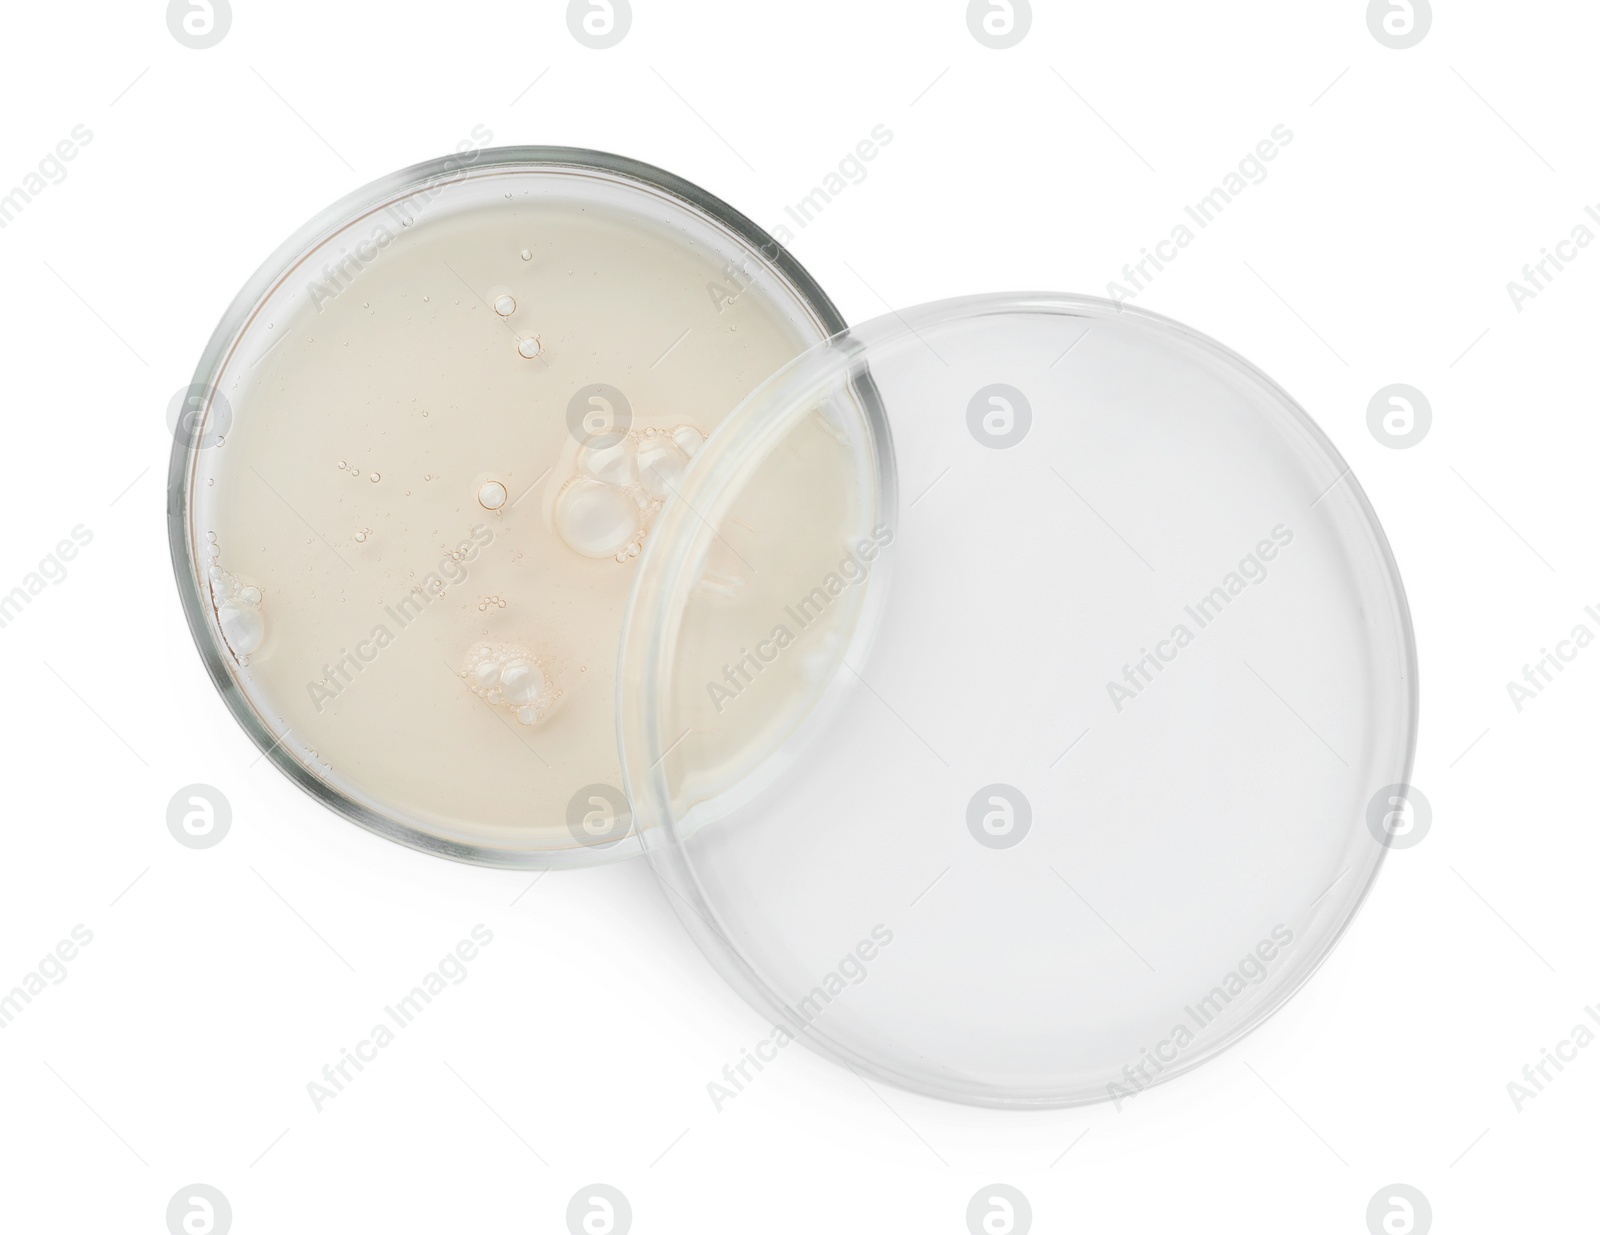 Photo of Petri dishes with different liquids on white background, top view